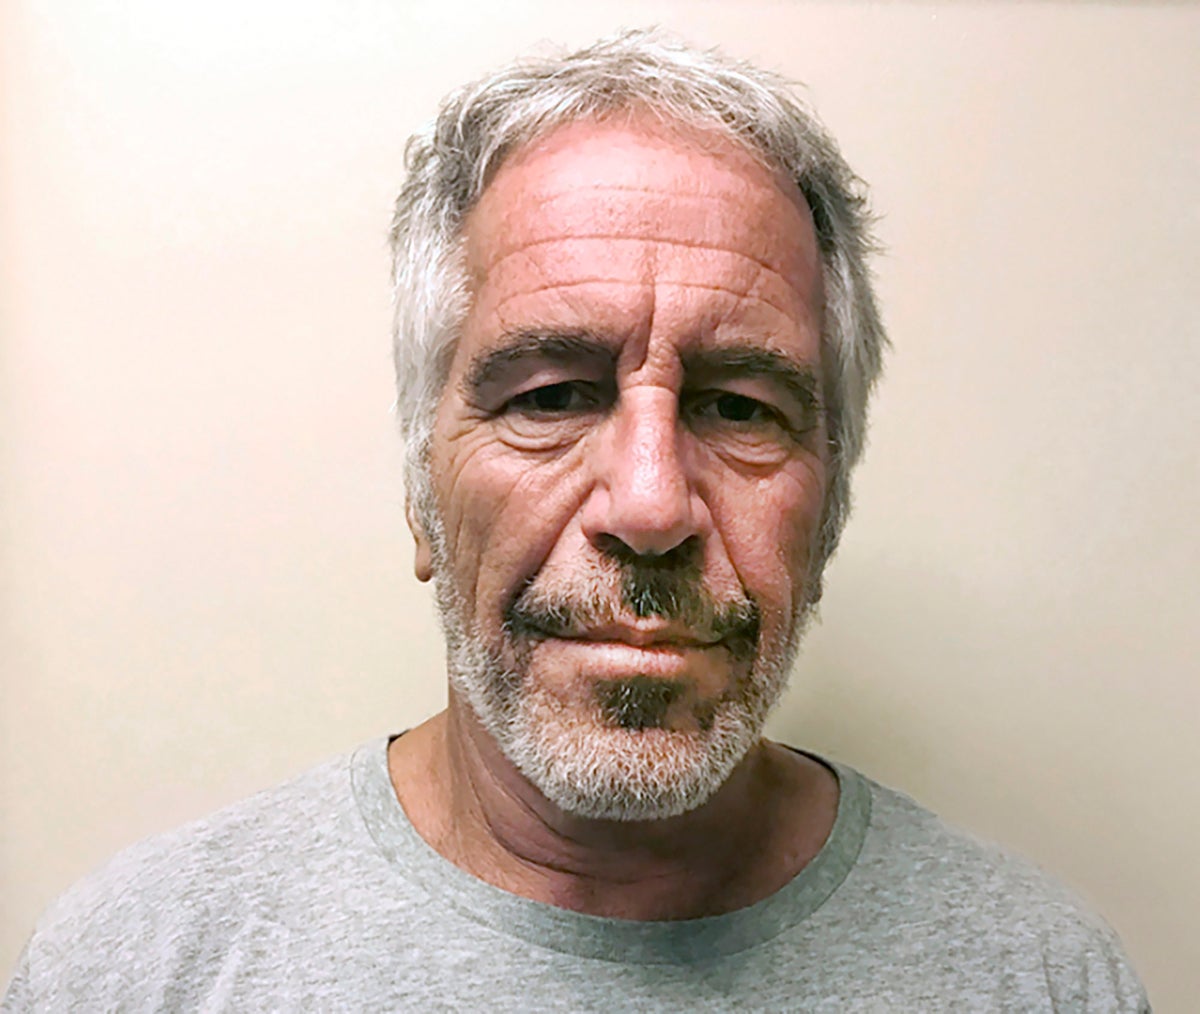 JPMorgan reaches settlement with victims of late paedophile Jeffrey Epstein